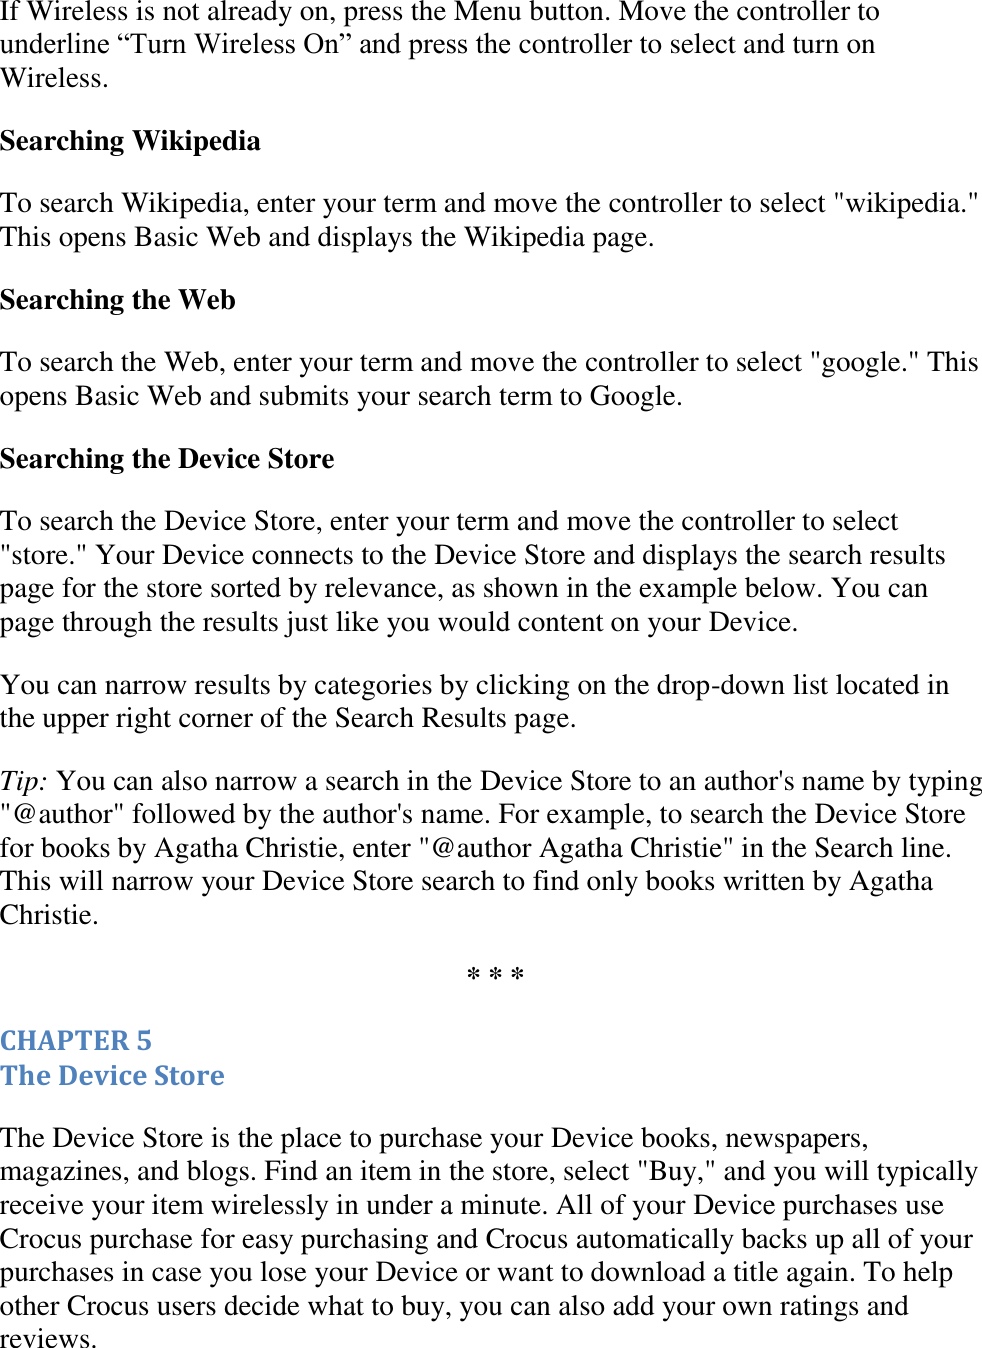   If Wireless is not already on, press the Menu button. Move the controller to underline “Turn Wireless On” and press the controller to select and turn on Wireless.  Searching Wikipedia To search Wikipedia, enter your term and move the controller to select &quot;wikipedia.&quot; This opens Basic Web and displays the Wikipedia page. Searching the Web To search the Web, enter your term and move the controller to select &quot;google.&quot; This opens Basic Web and submits your search term to Google. Searching the Device Store To search the Device Store, enter your term and move the controller to select &quot;store.&quot; Your Device connects to the Device Store and displays the search results page for the store sorted by relevance, as shown in the example below. You can page through the results just like you would content on your Device. You can narrow results by categories by clicking on the drop-down list located in the upper right corner of the Search Results page.  Tip: You can also narrow a search in the Device Store to an author&apos;s name by typing &quot;@author&quot; followed by the author&apos;s name. For example, to search the Device Store for books by Agatha Christie, enter &quot;@author Agatha Christie&quot; in the Search line. This will narrow your Device Store search to find only books written by Agatha Christie. * * * CHAPTER 5 The Device Store The Device Store is the place to purchase your Device books, newspapers, magazines, and blogs. Find an item in the store, select &quot;Buy,&quot; and you will typically receive your item wirelessly in under a minute. All of your Device purchases use Crocus purchase for easy purchasing and Crocus automatically backs up all of your purchases in case you lose your Device or want to download a title again. To help other Crocus users decide what to buy, you can also add your own ratings and reviews. 